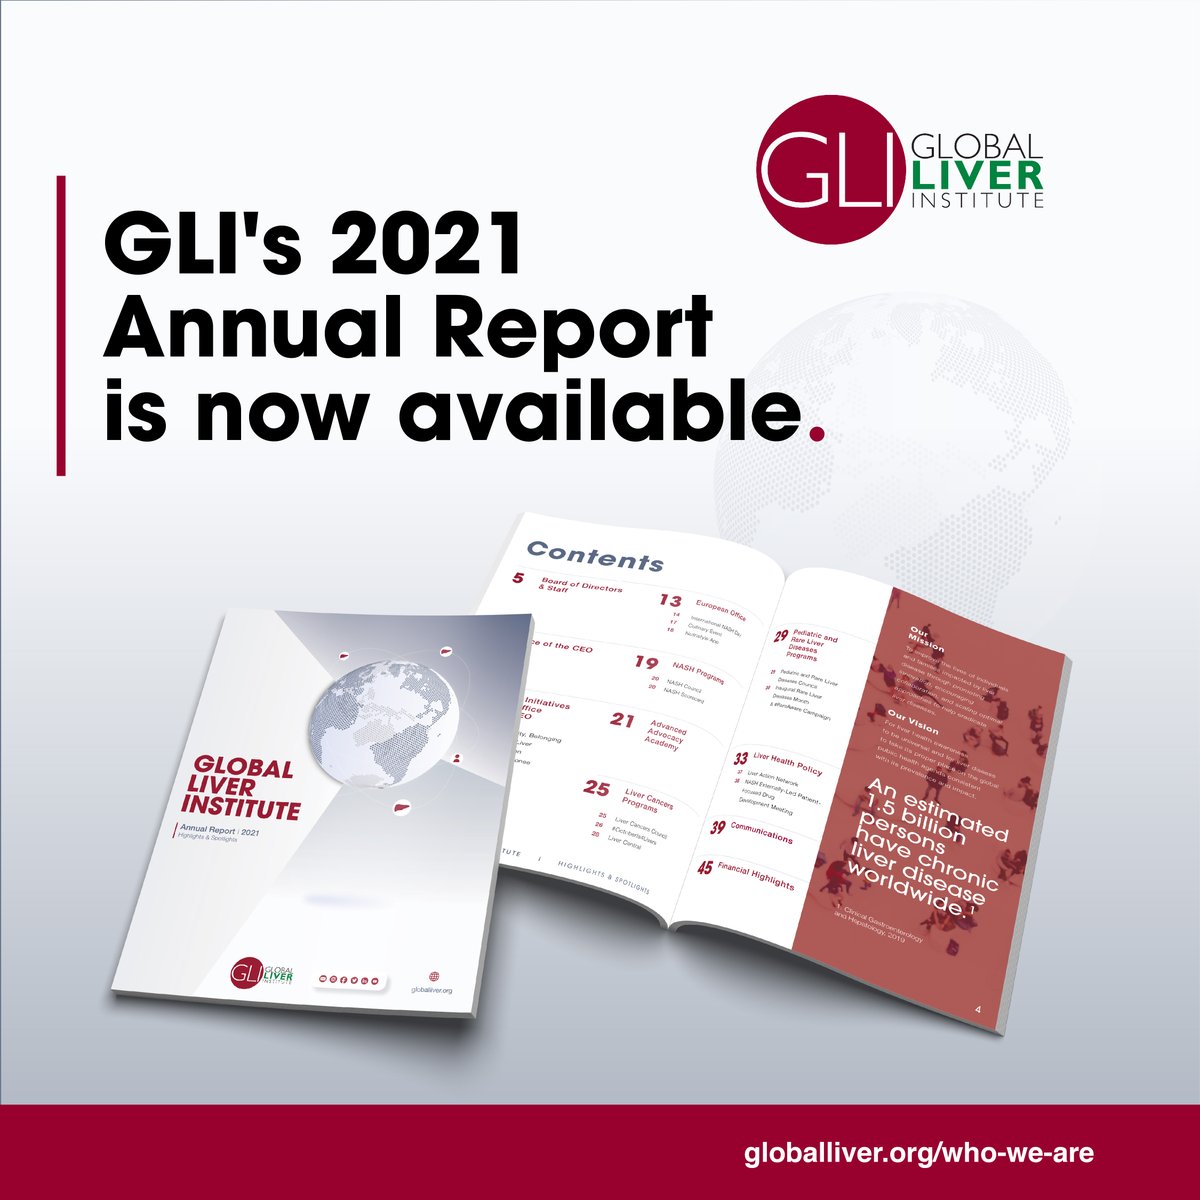 📣 Our 2021 Annual Report is now available! 📖 Explore the worldwide impact GLI made last year in this detailed summary of our engagements, initiatives, and achievements. 🗺️ 💻 View the report and learn more: tinyurl.com/3mmnumuj #liver #liverhealth #patientadvocacy